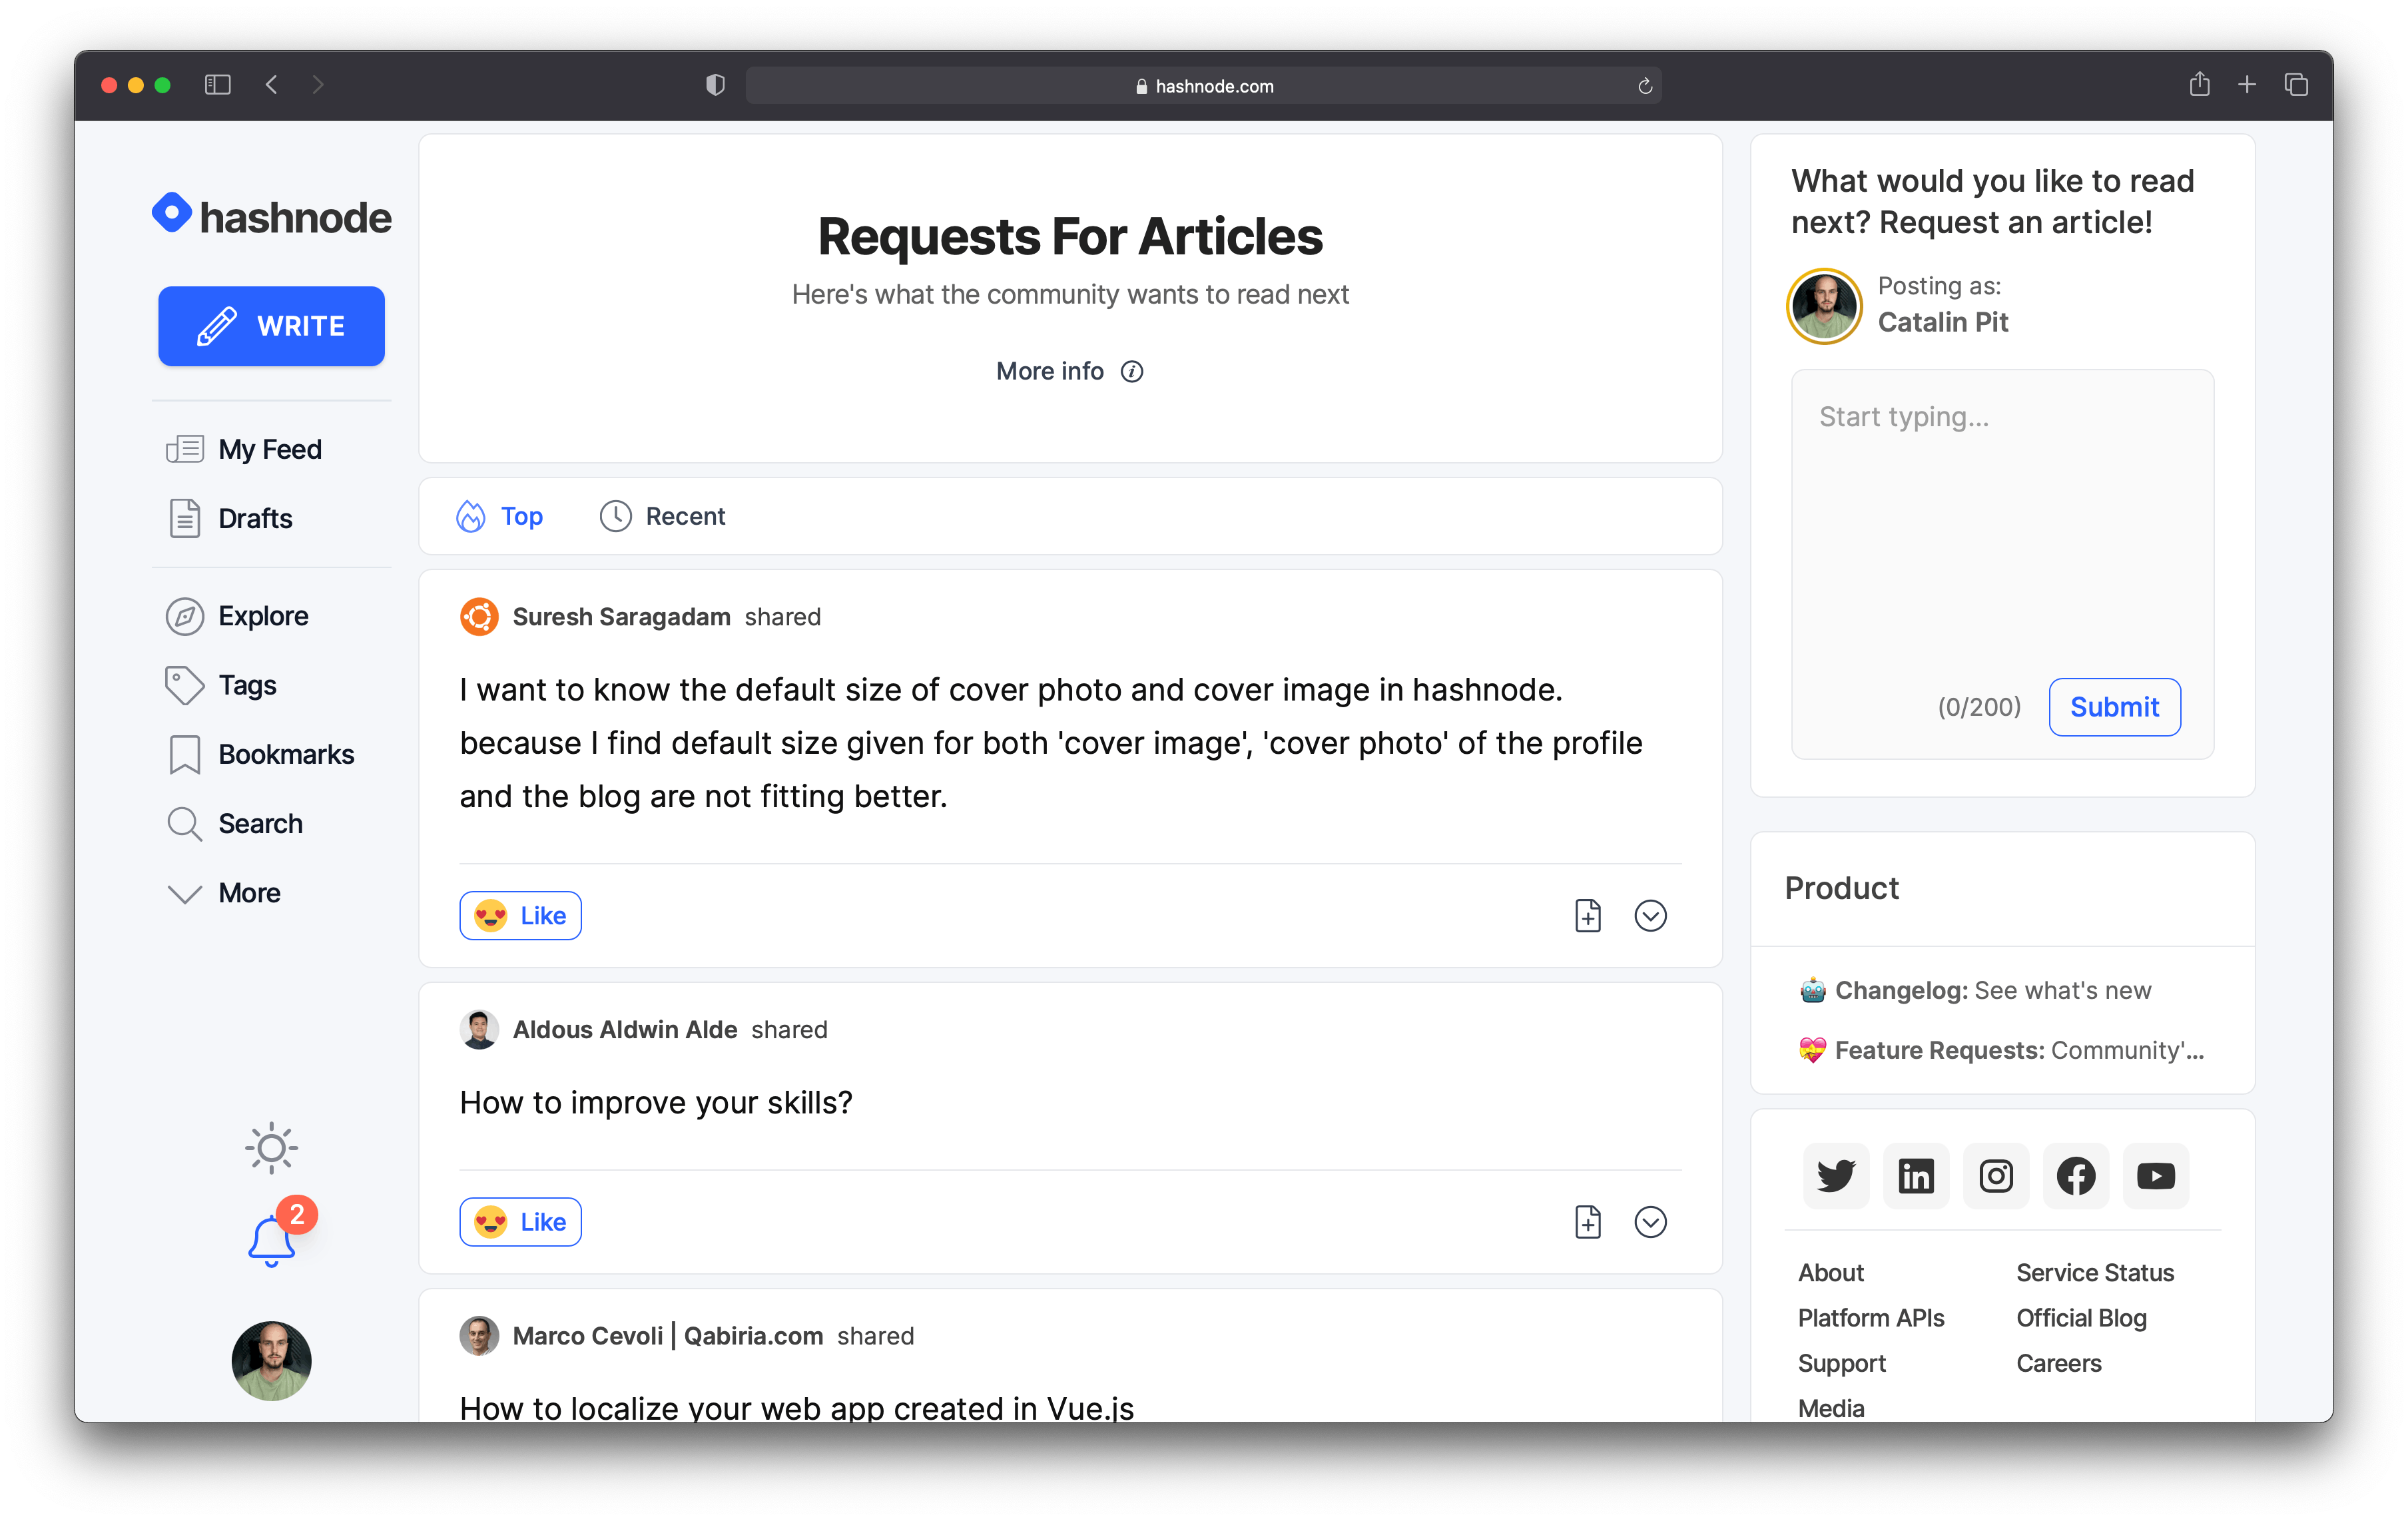 A screenshot of the Hashnode Requests For Articles web page